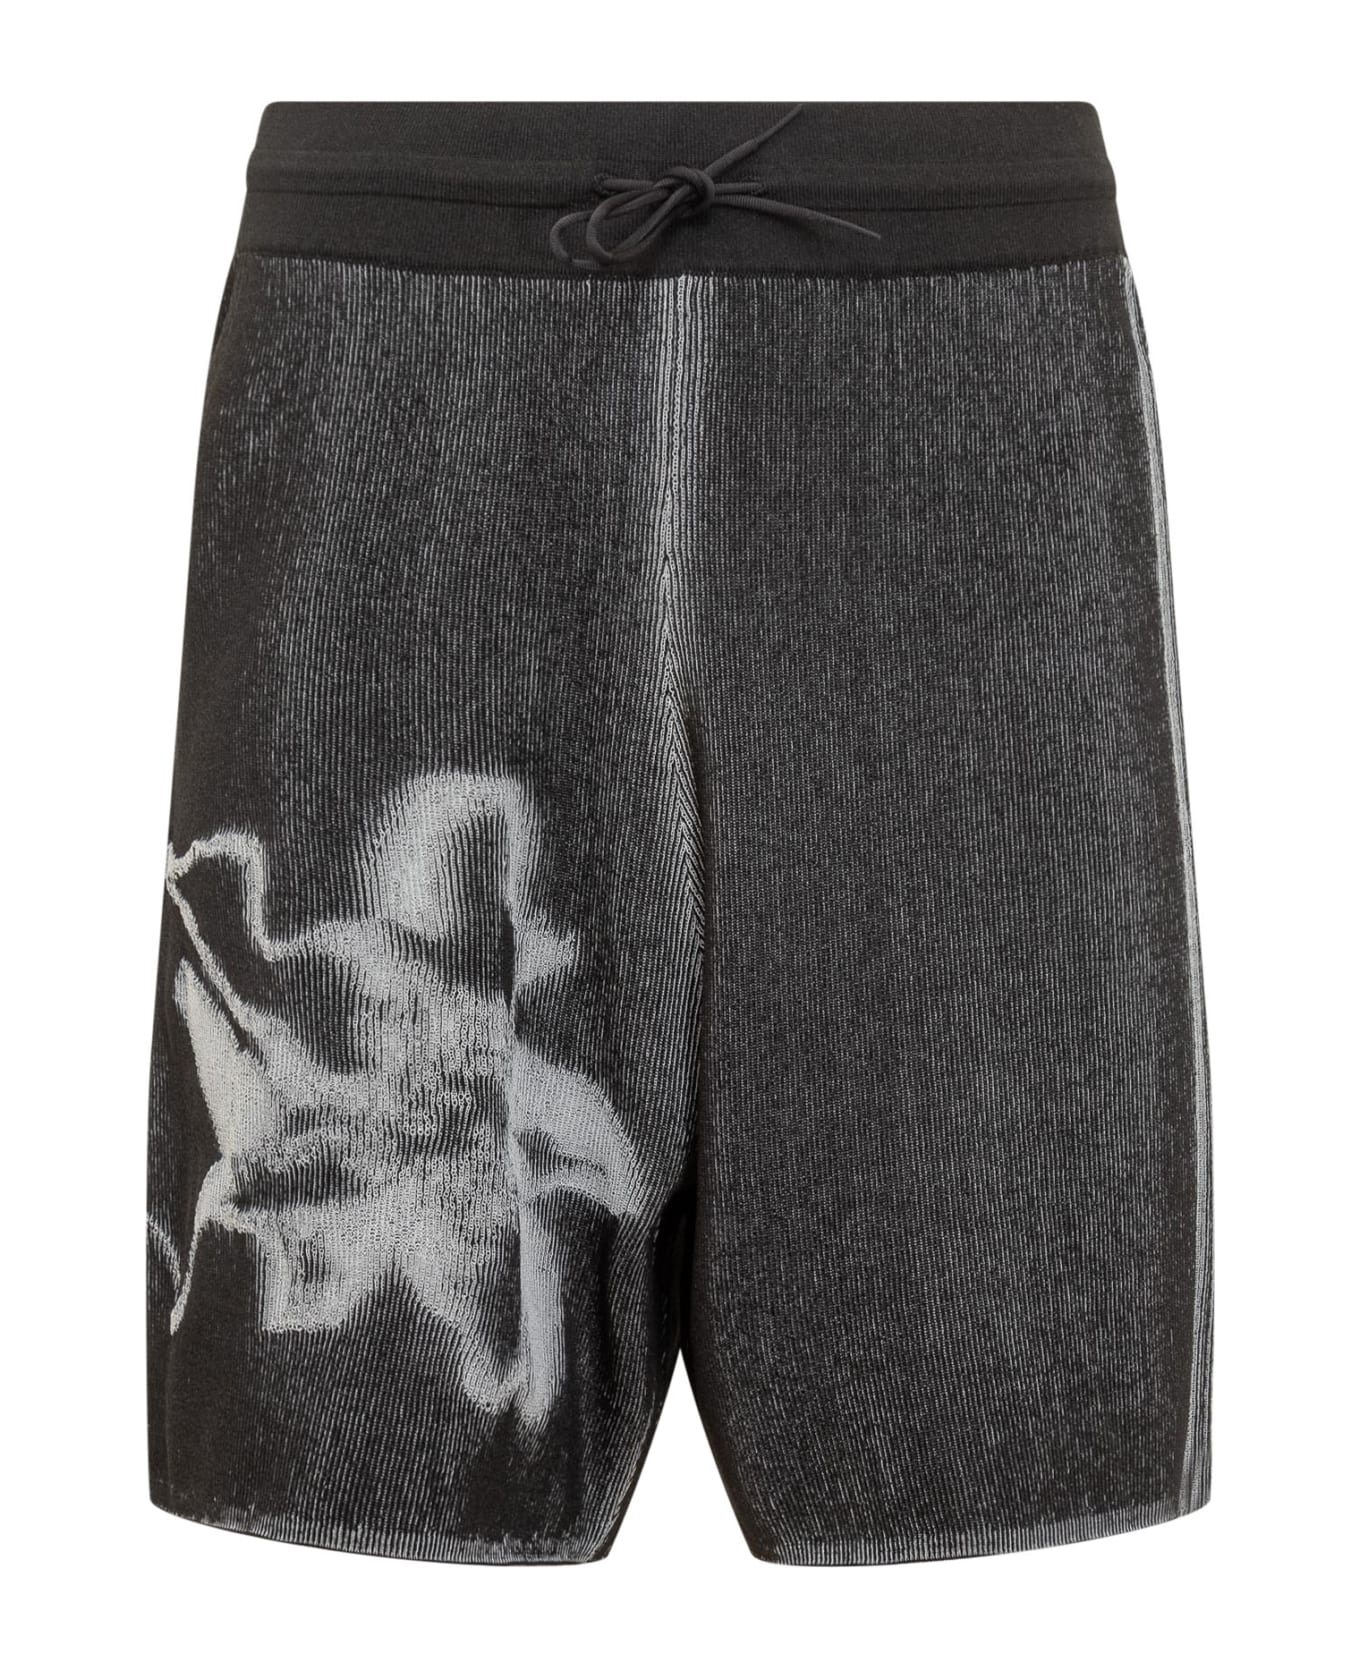 Y-3 Gfx Relaxed Fit Knit Shorts - BLACK/WHITE